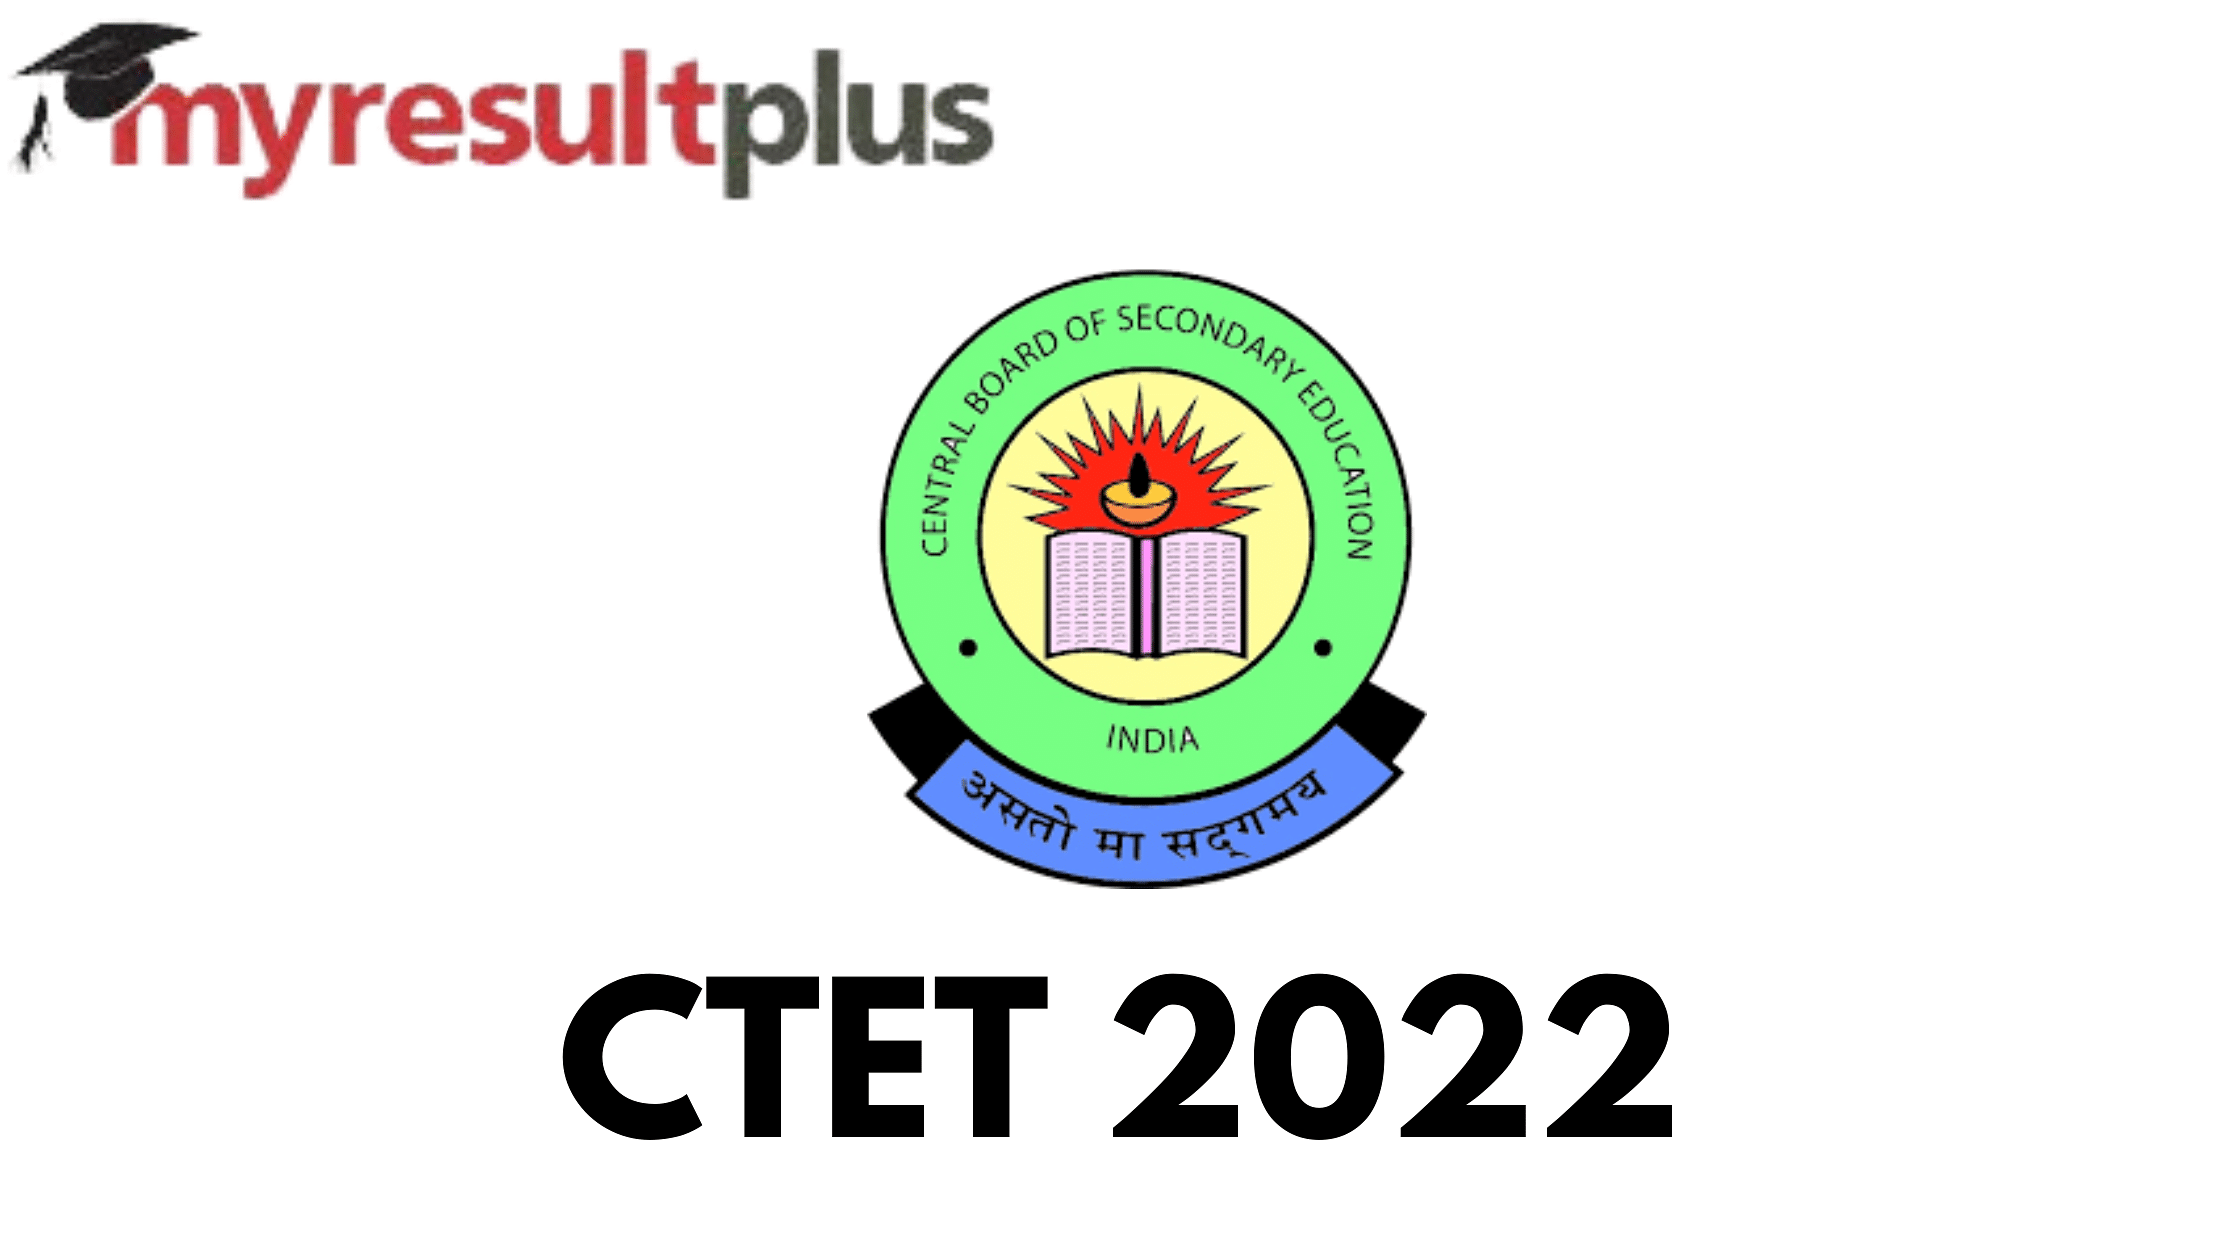 CTET 2022: Board Issues Notice In Regard to Exam, Check Details Here